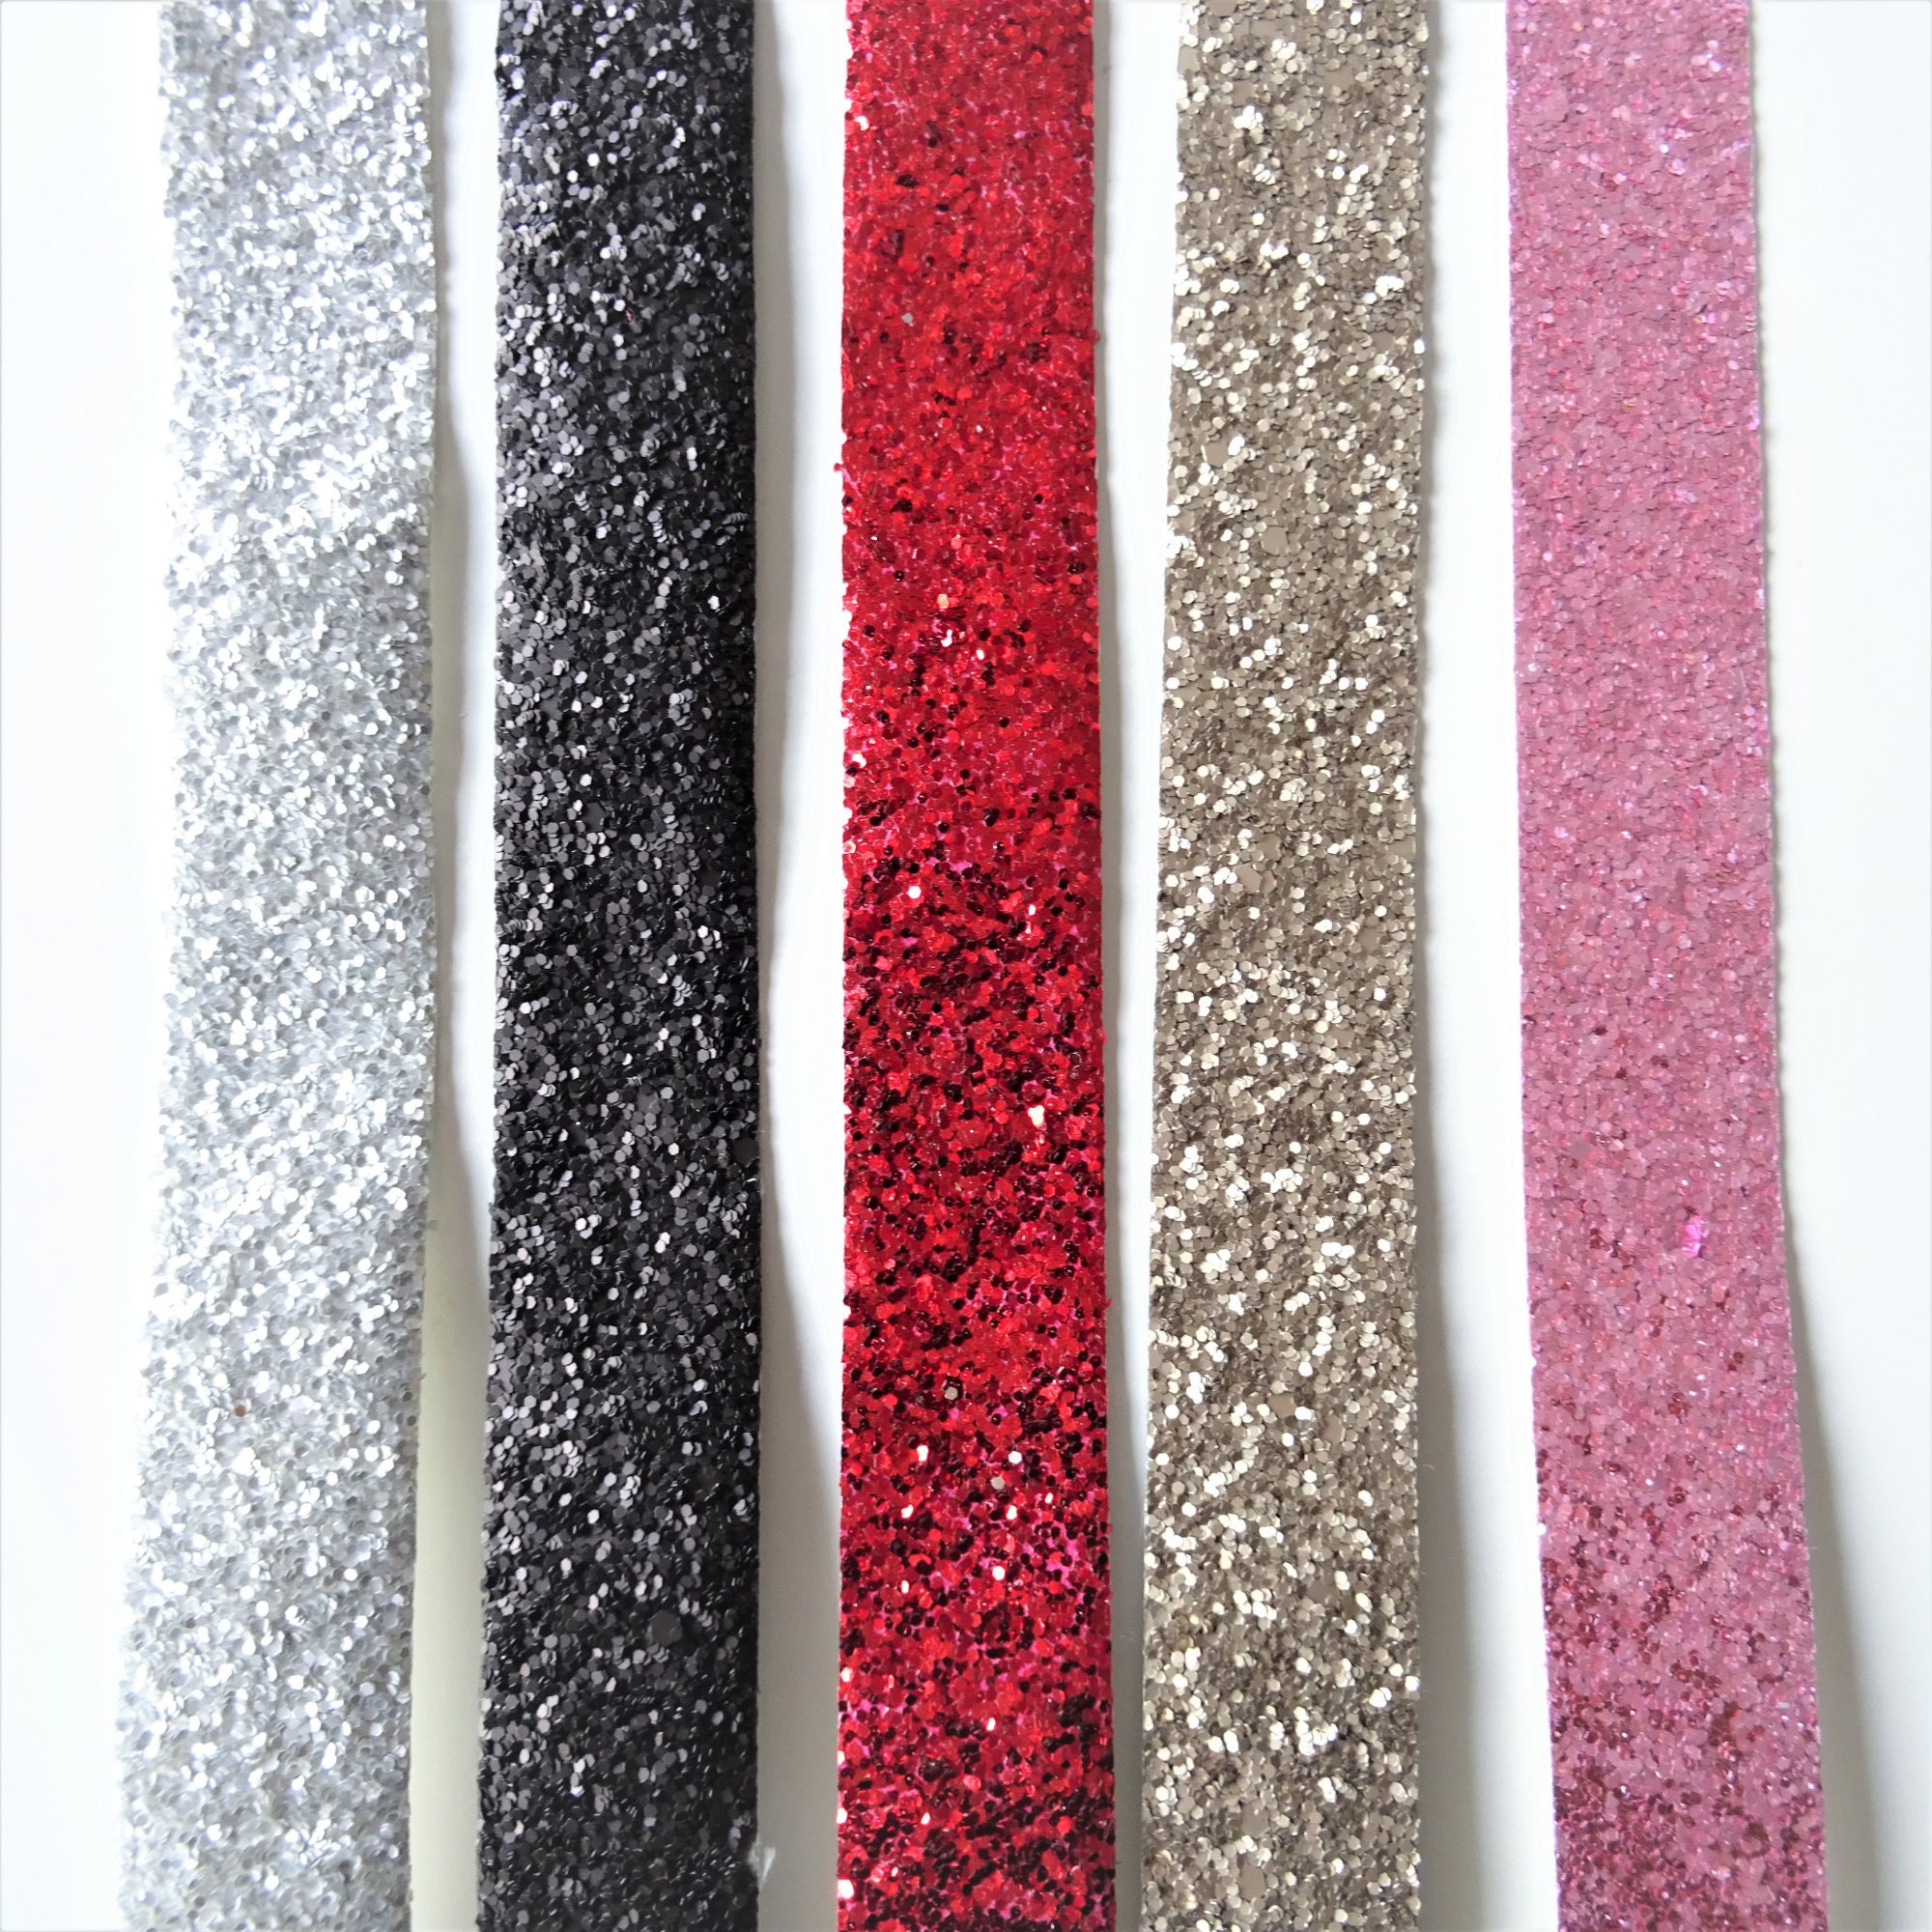 Sparkle Glitter Ribbon in Gold Pink Red Silver & Black, 1 Width